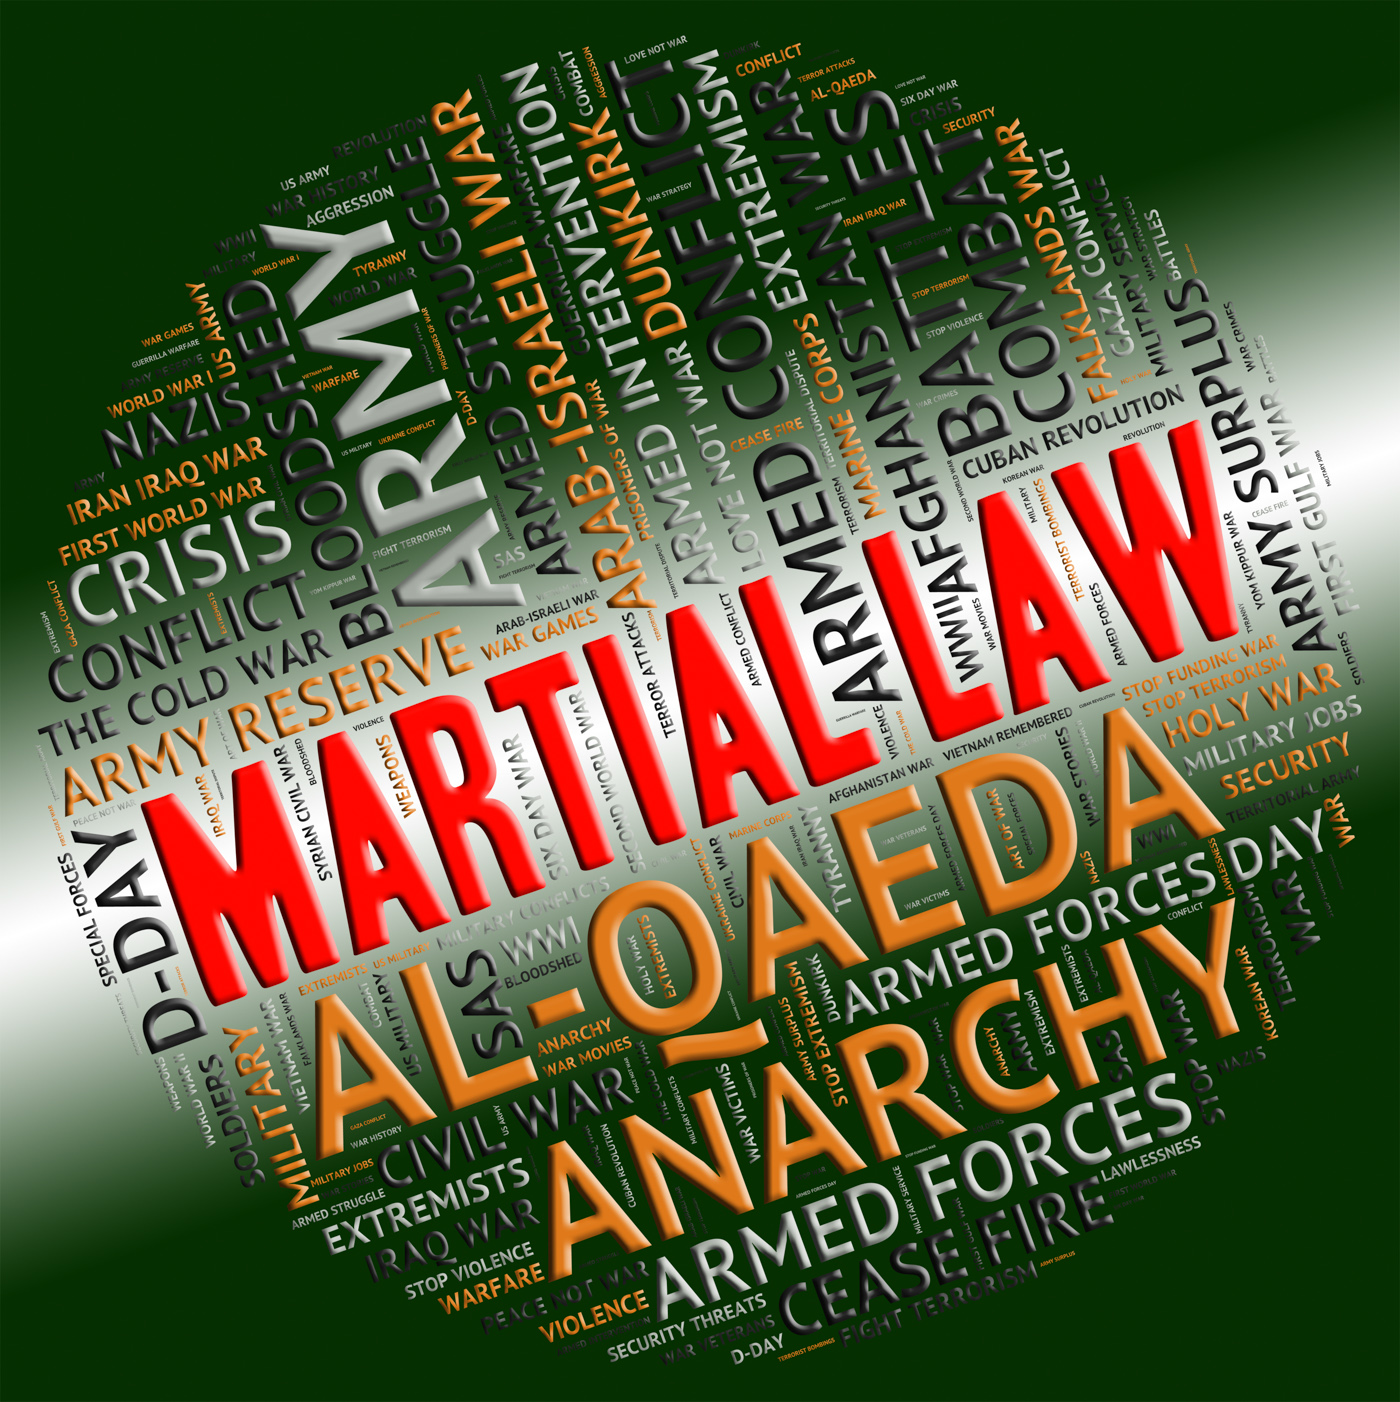 Martial Law Shows Military Action And Defence, Defence, Statute, Militaryaction, Service, HQ Photo